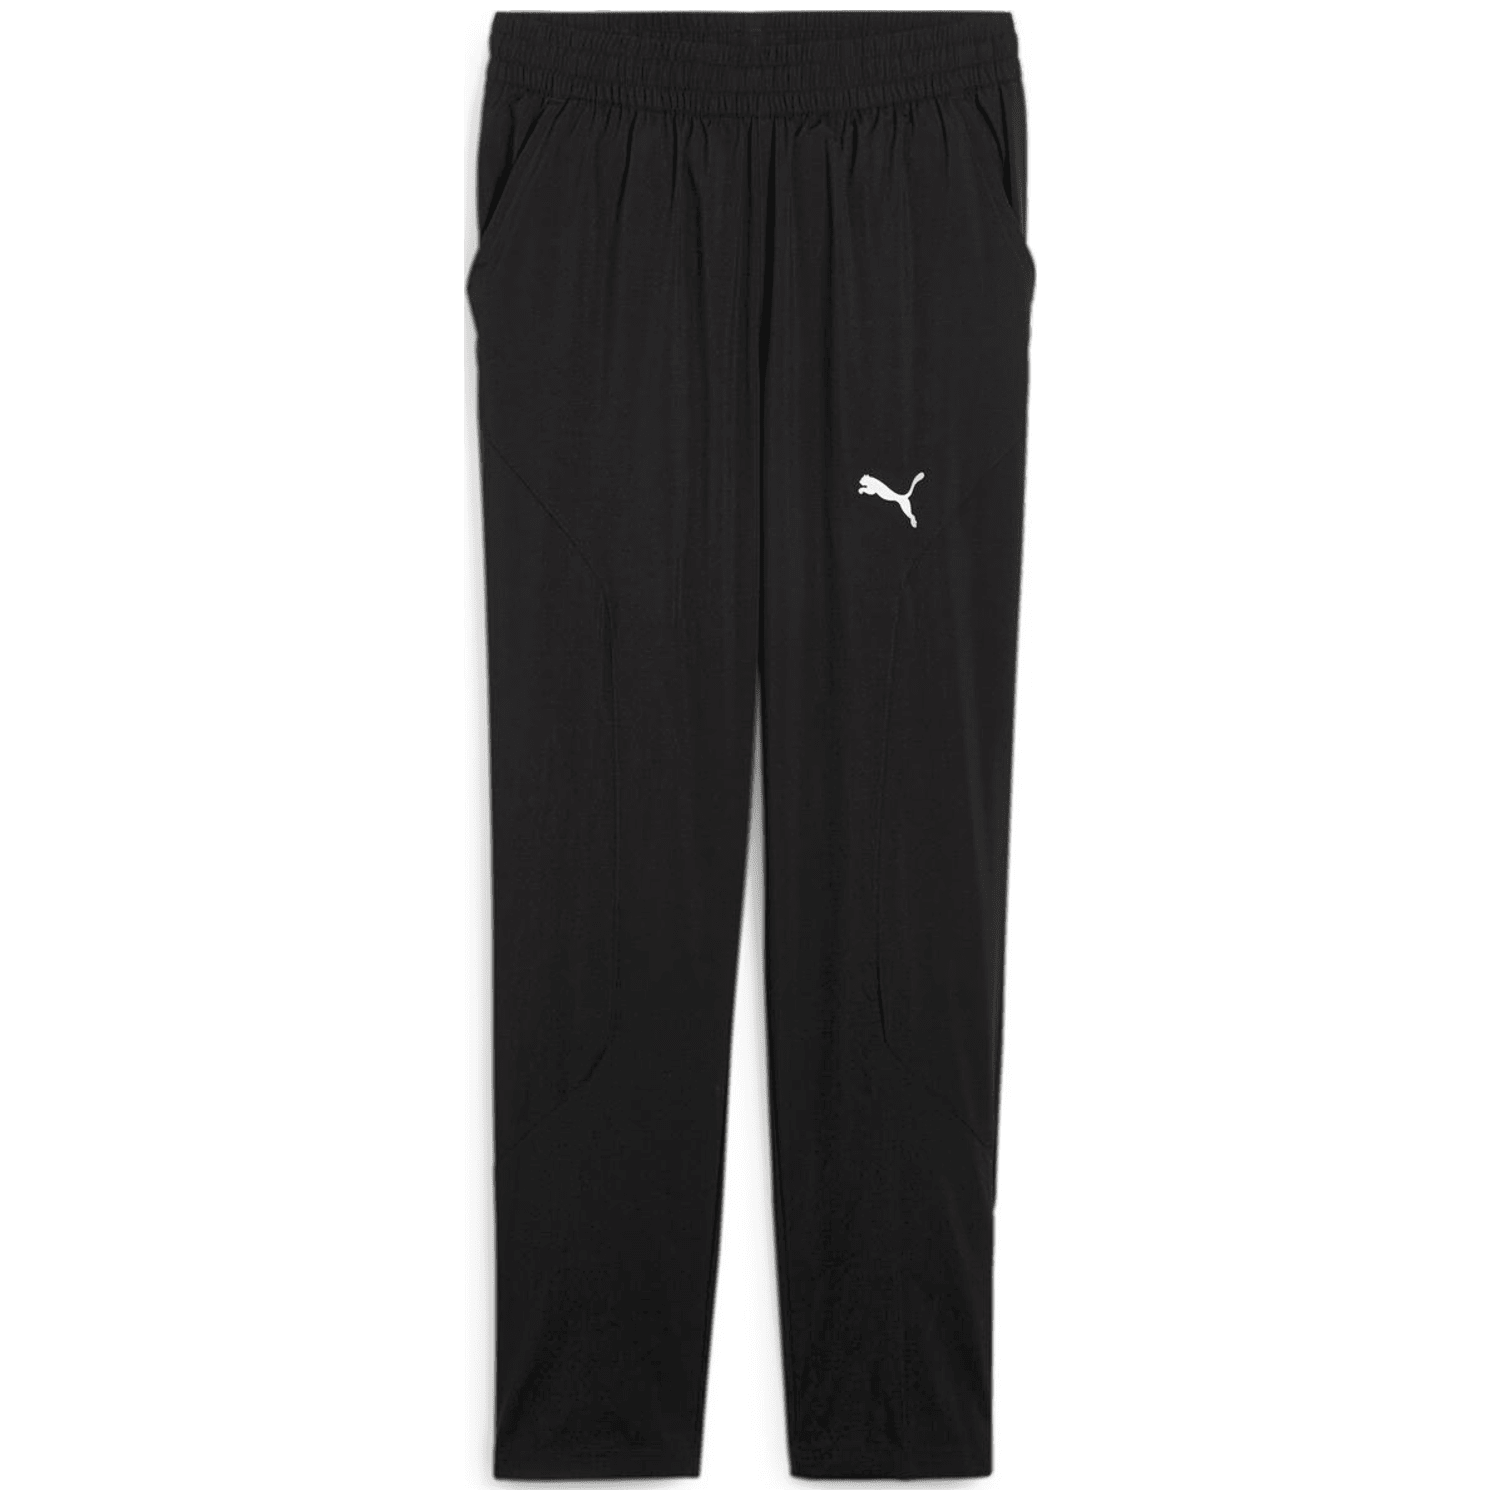 Puma FIT Woven Tapered Herren Sporthose